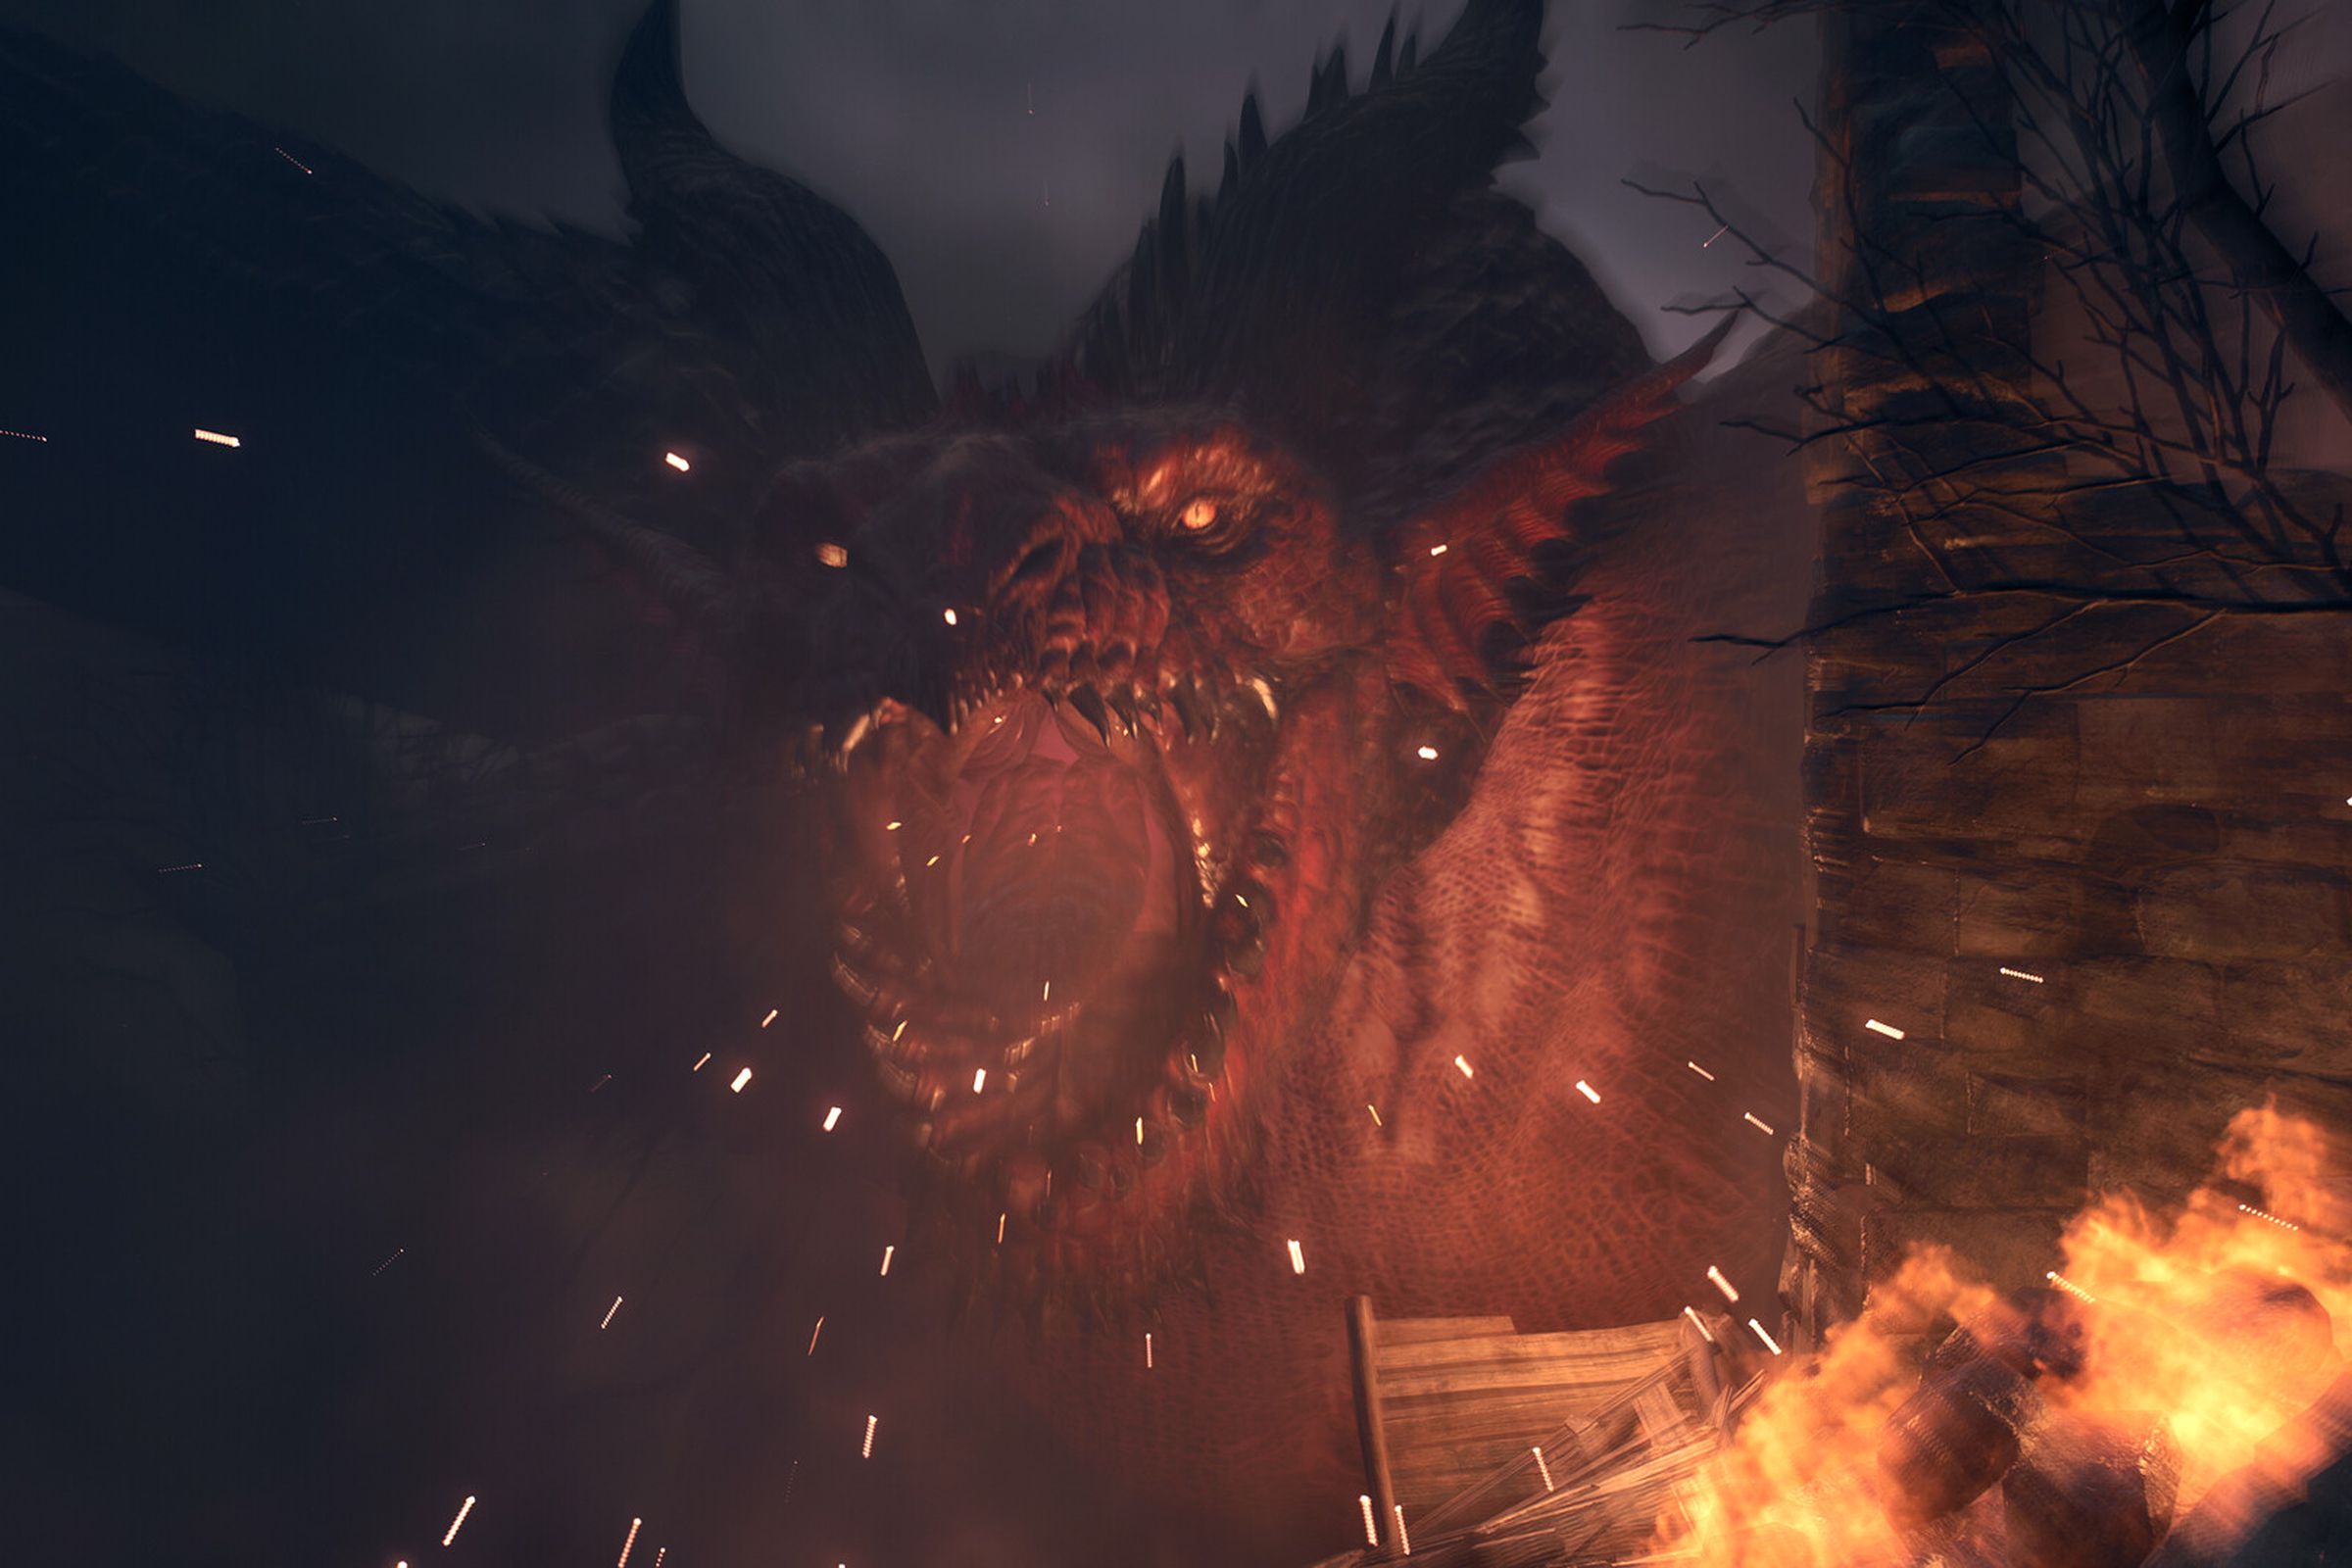 Screenshot from Dragon’s Dogma 2 featuring a large red dragon roaring as flames burn around the edges of the image